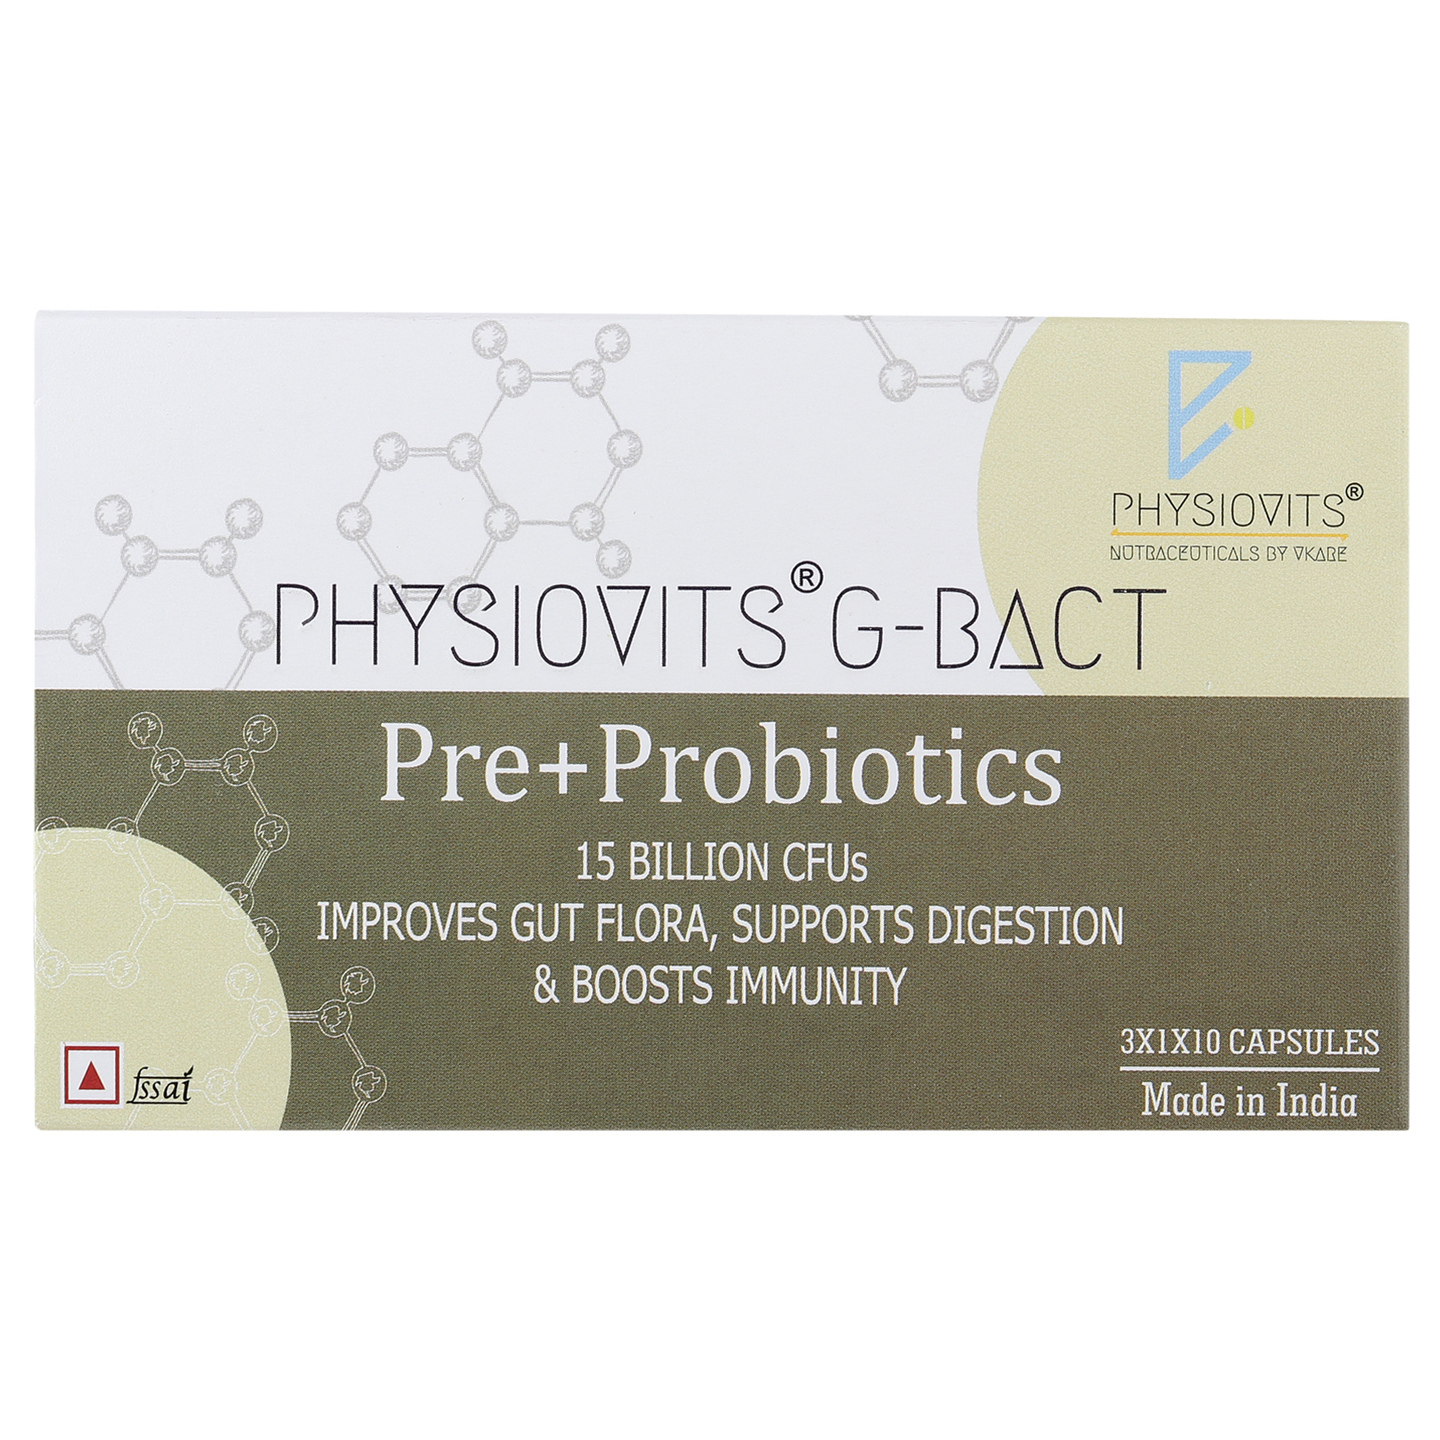 Physiovits G-BACT Pre and Probiotics Capsules - 3 Strips of 10 Capsules - 30 Capsules Box